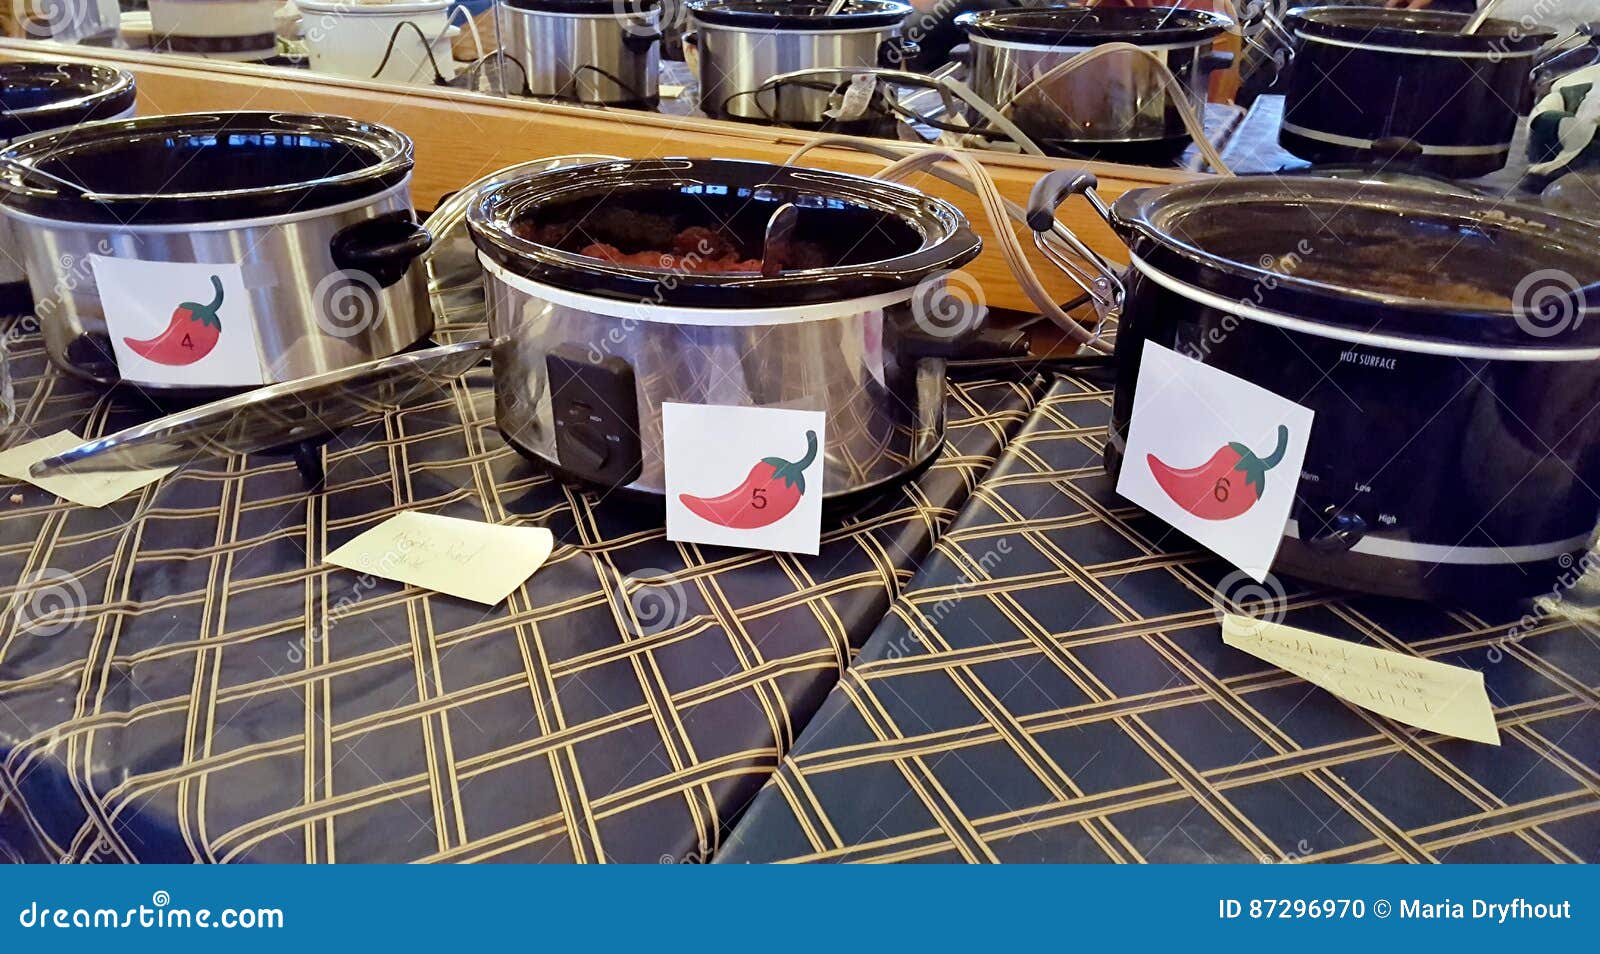 row of crock pots in chili cook-off contest